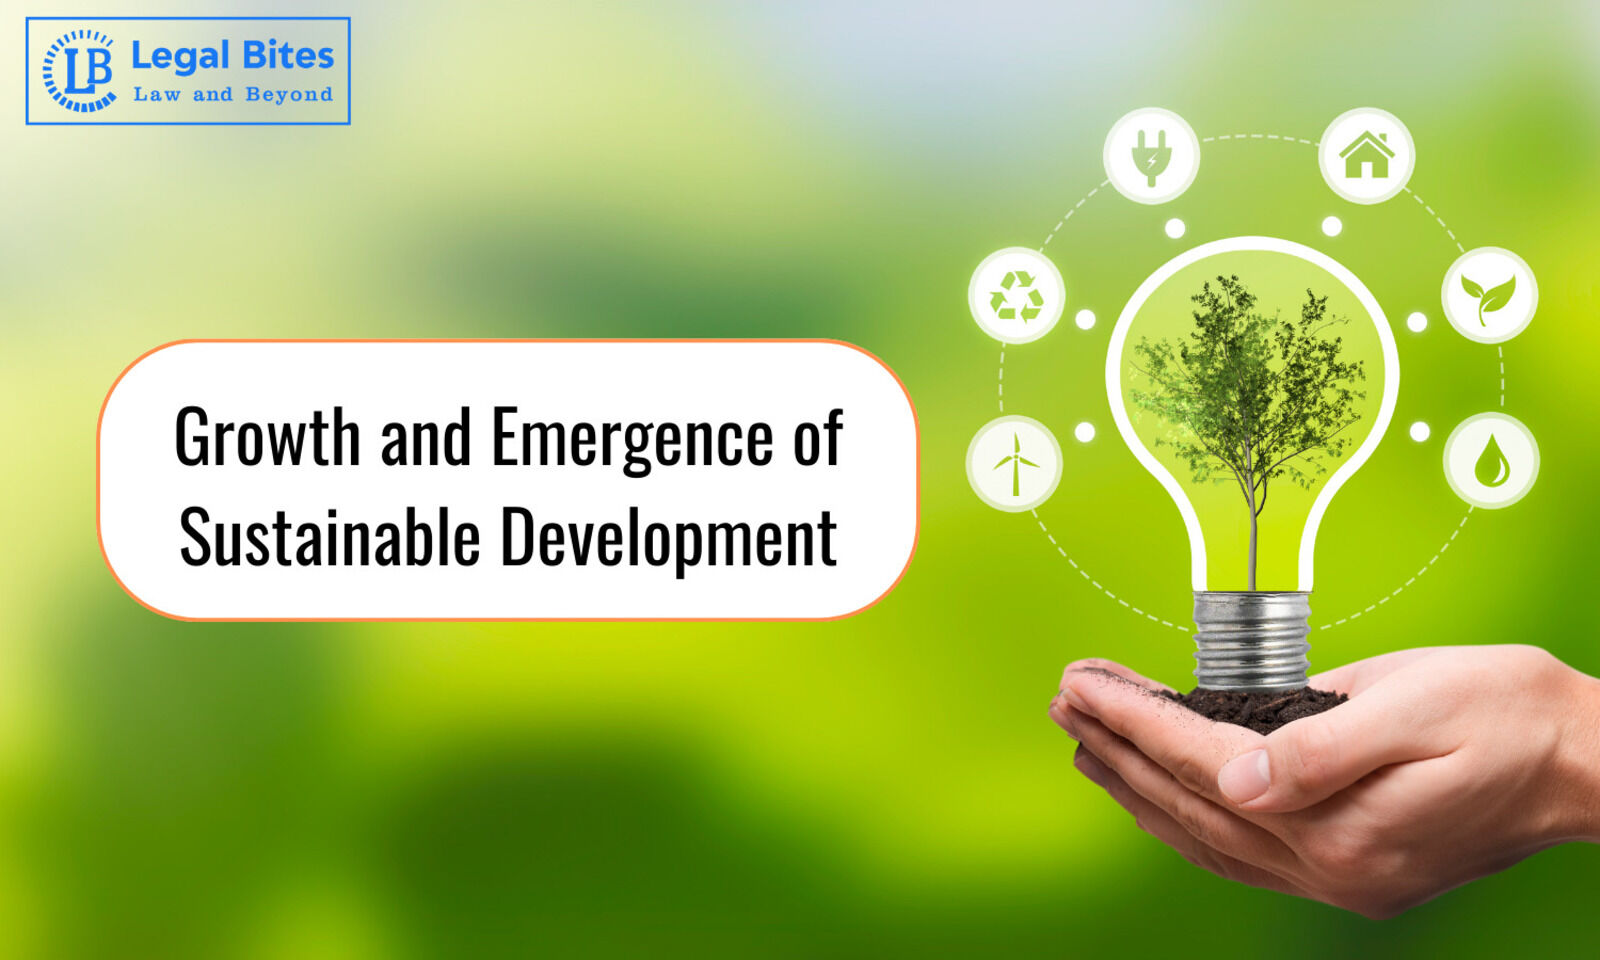 Growth and Emergence of Sustainable Development